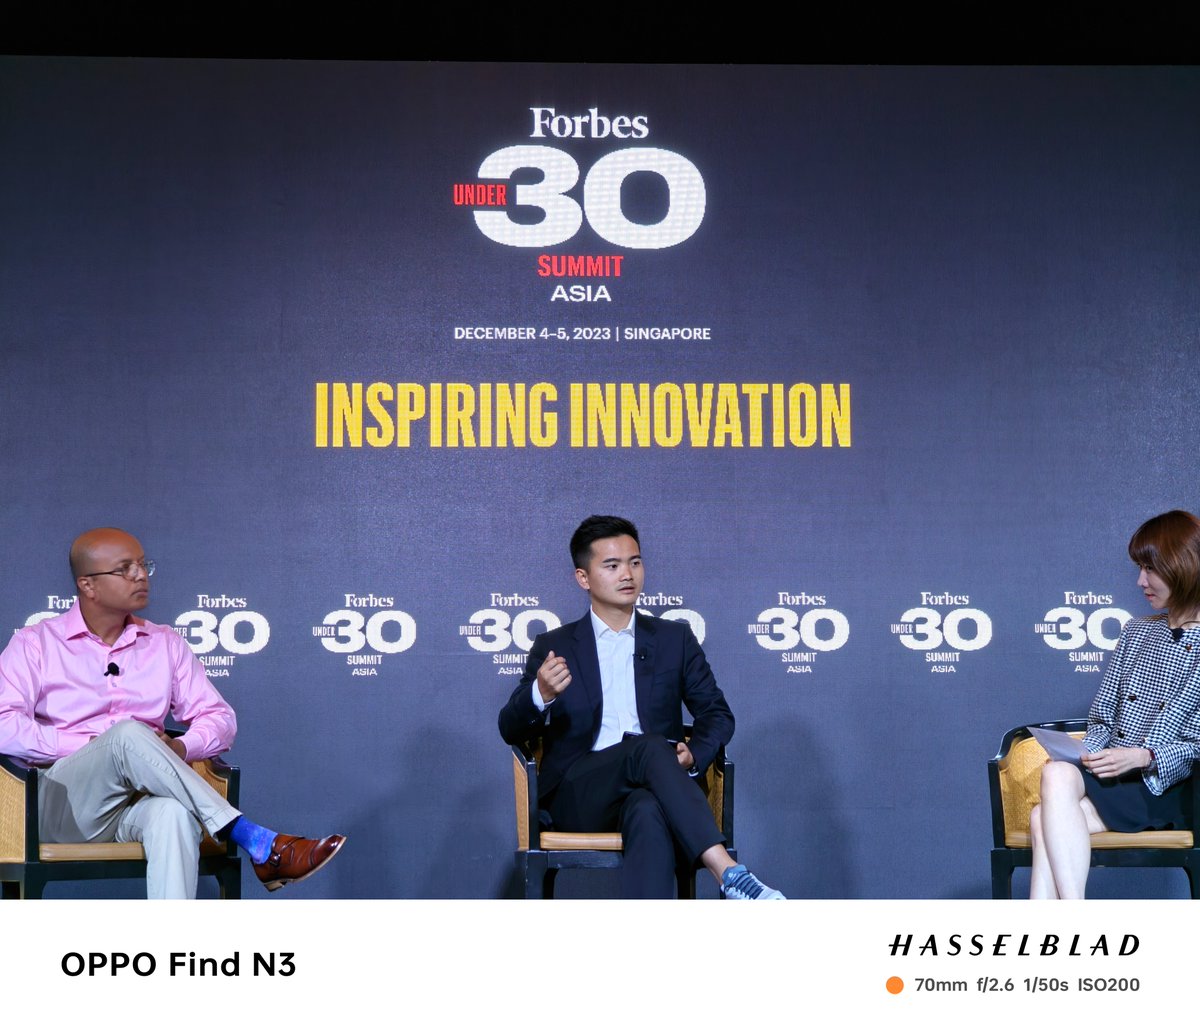 Inspirational entrepreneurs need innovation with their tech.

We're proud to sponsor the @ForbesAsia  #Under30Summit and support the next generation of trailblazers.

Discover more about the #OPPOFindersClub 🔗 oppo.com/en/events/oppo…

#ShotonOPPO
#OPPOFindN3